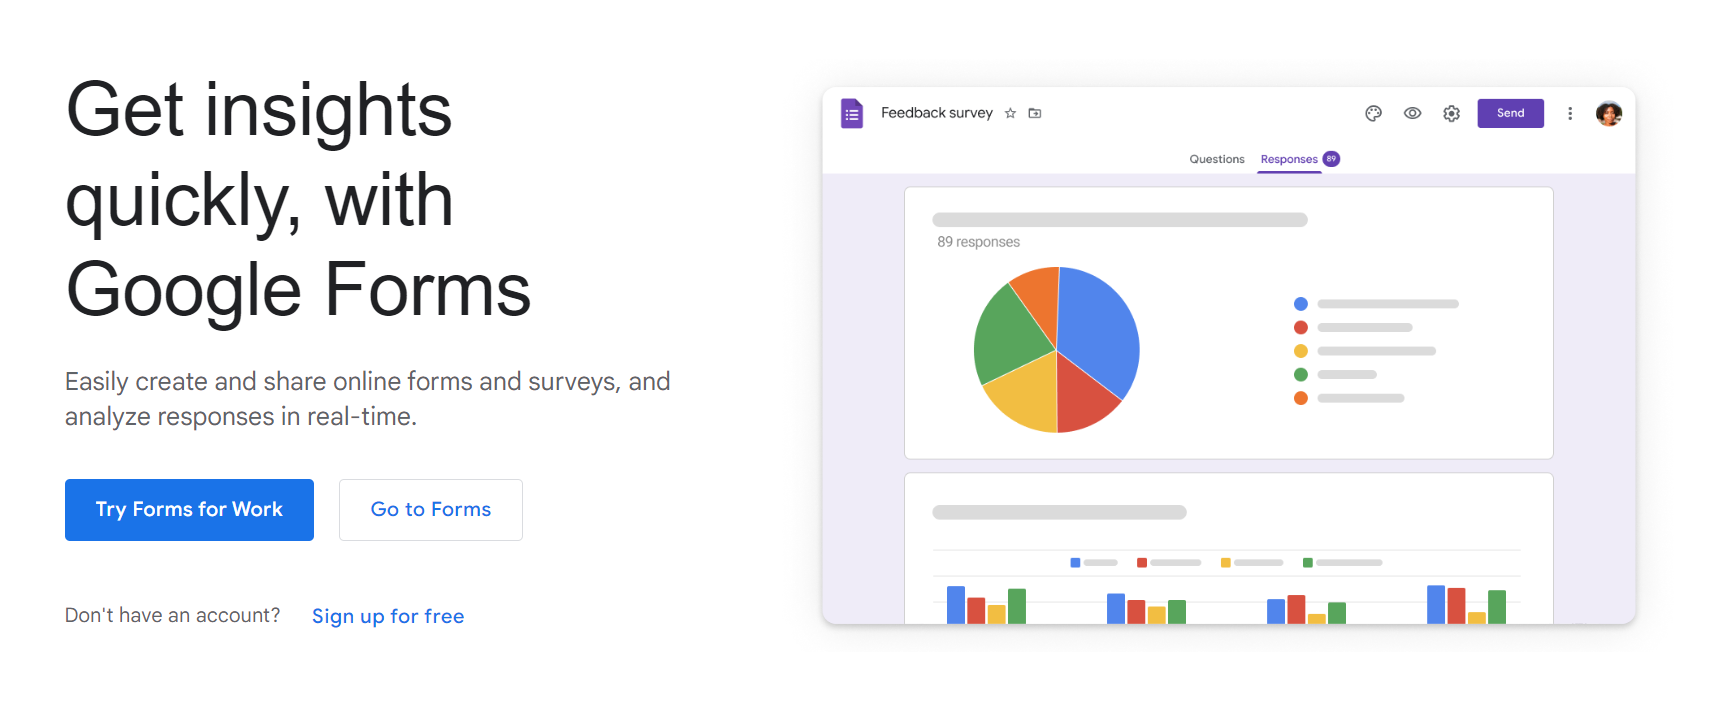 The image is of Google Forms homepage, a CSAT tool for measuring customer satisfaction. 